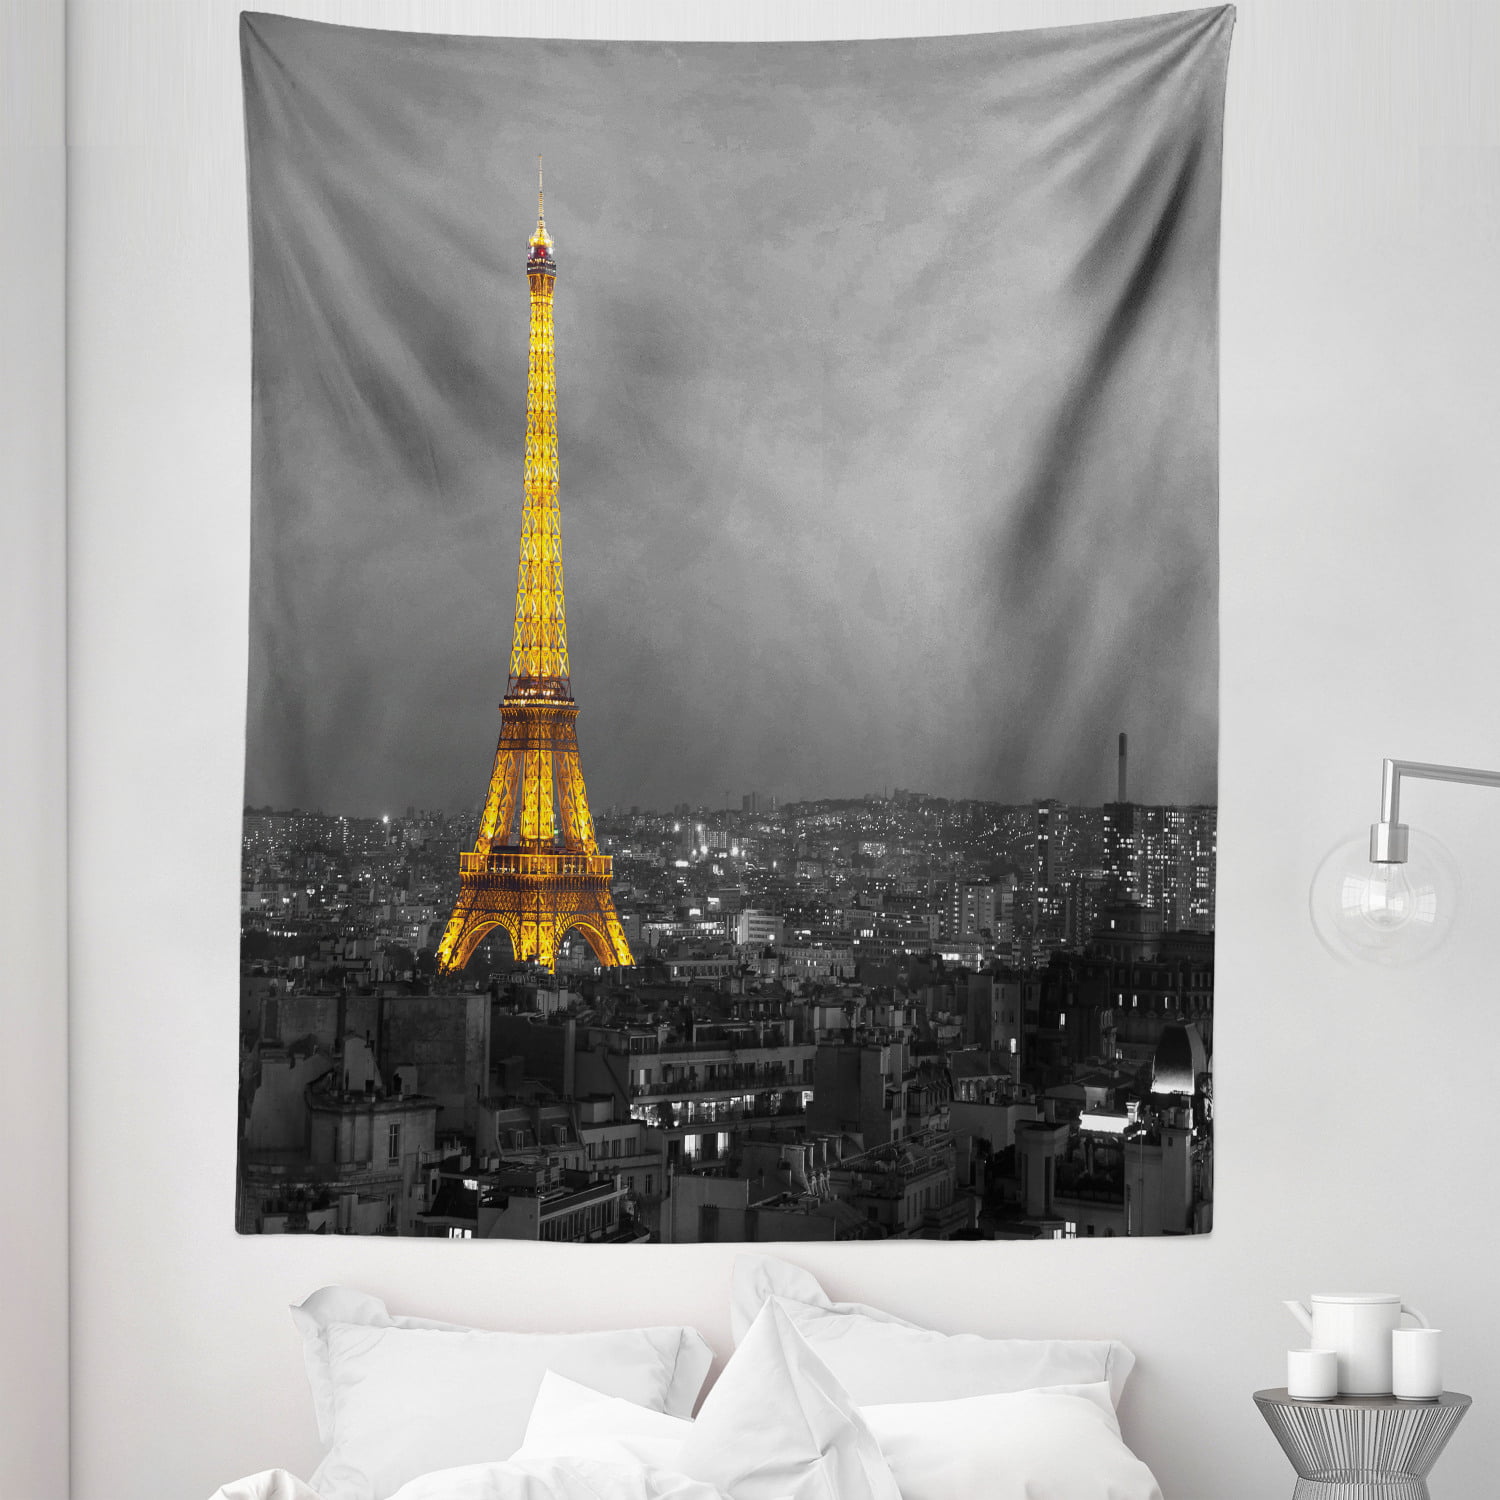 Eiffel Tower Tapestry Wall Hanging Mandala Bedspread Indian Home Decor 